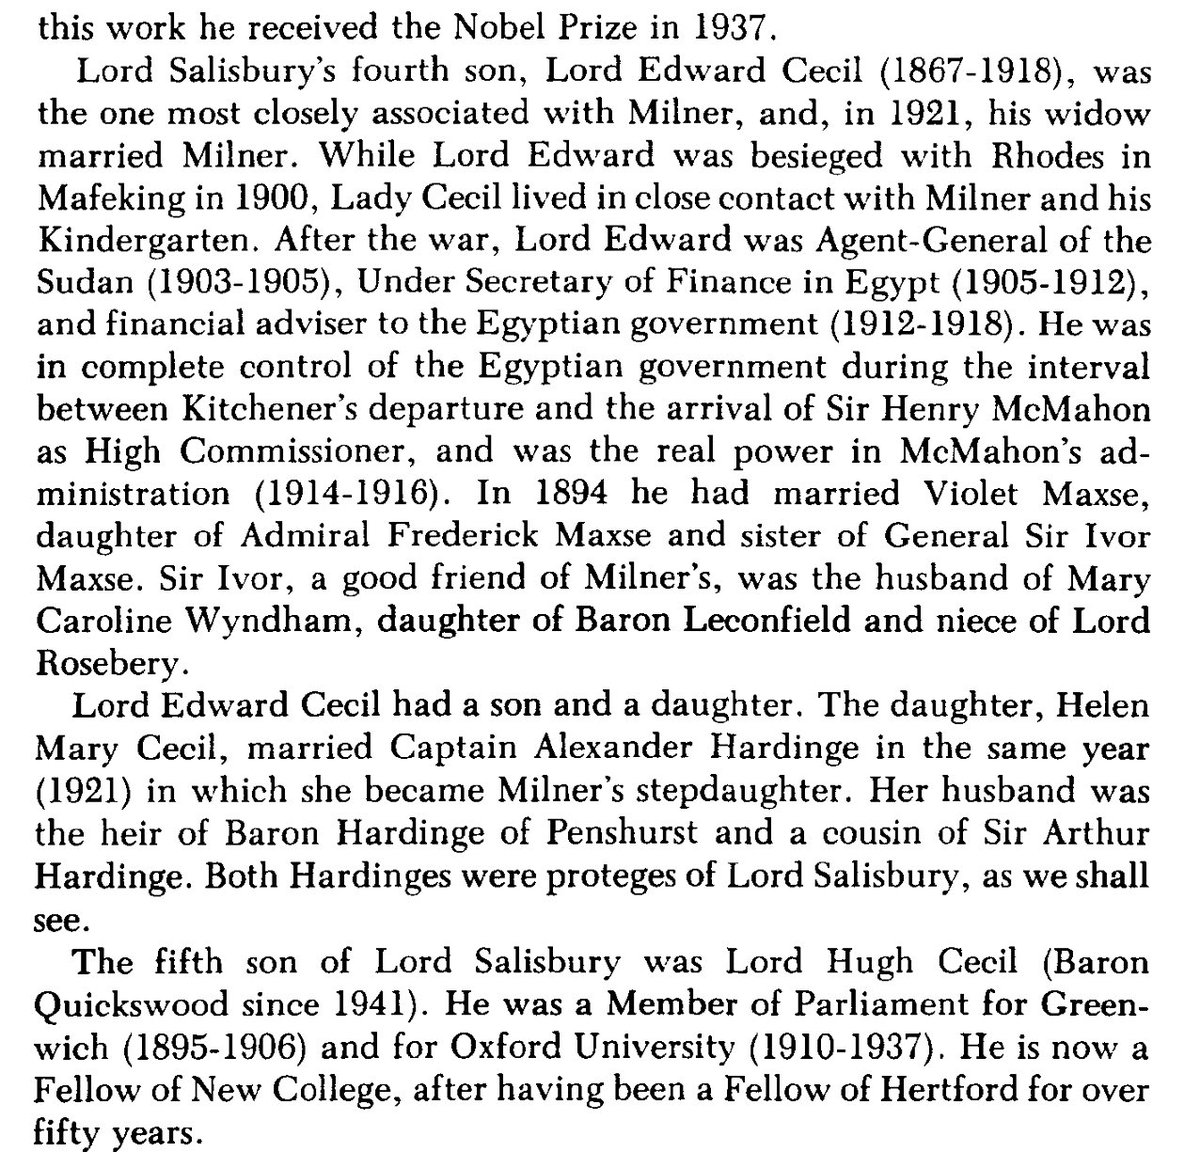 Lord Salisbury practiced a shameless nepotism, concealed to some extent by the shifting of names because of acquisition of titles and female marital connections, and redeemed by the fact that ability as well as family connection was required from appointees.Quigley